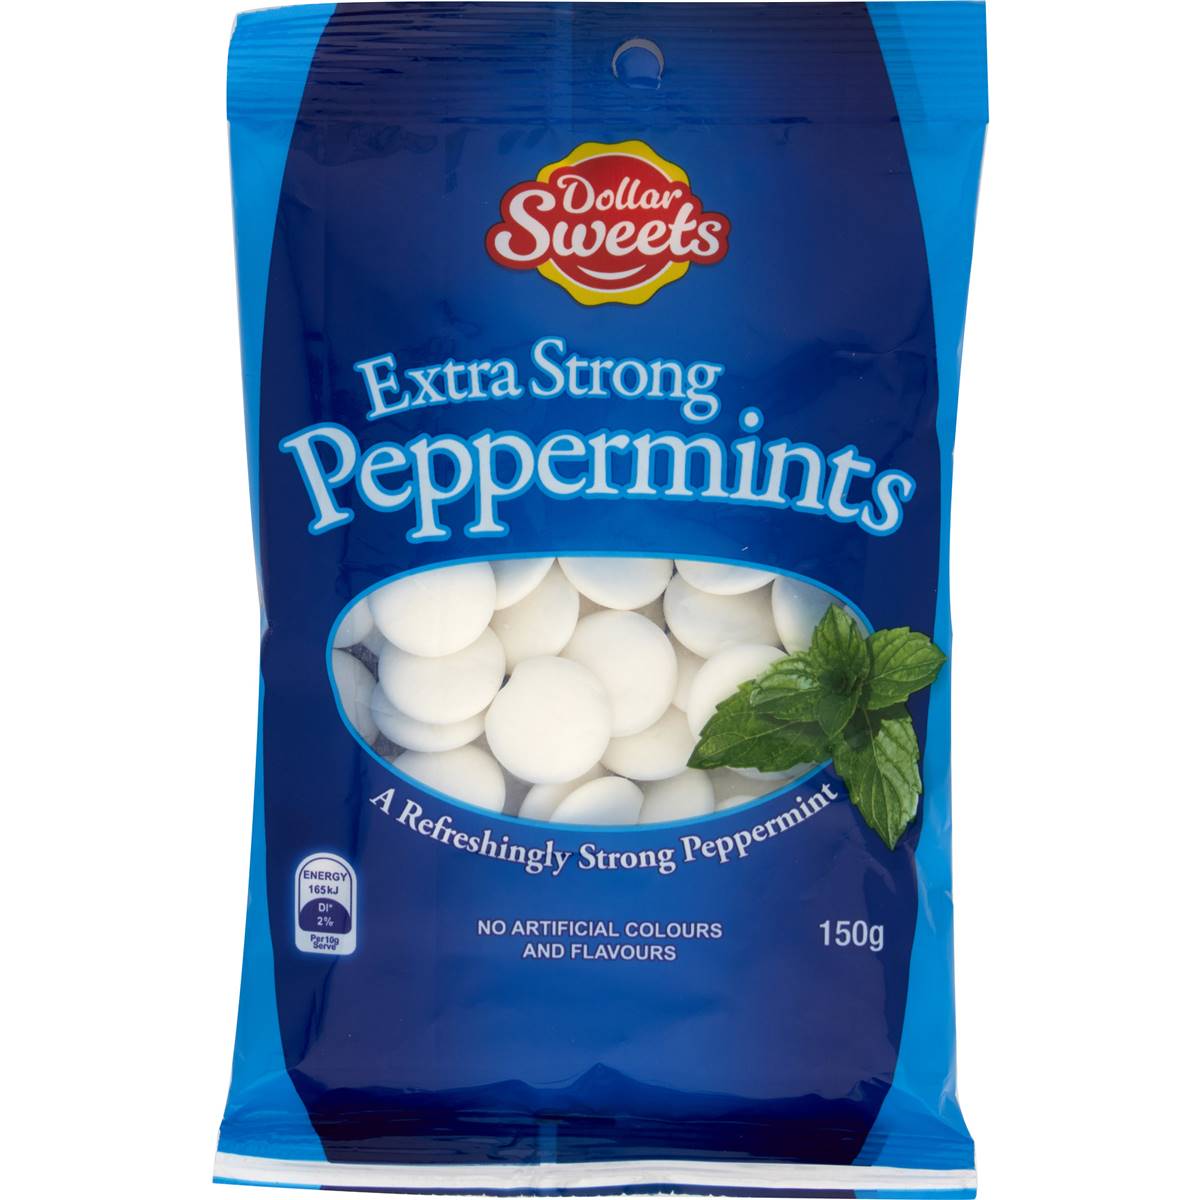 Dollar Sweets Peppermints Extra Strong 150g